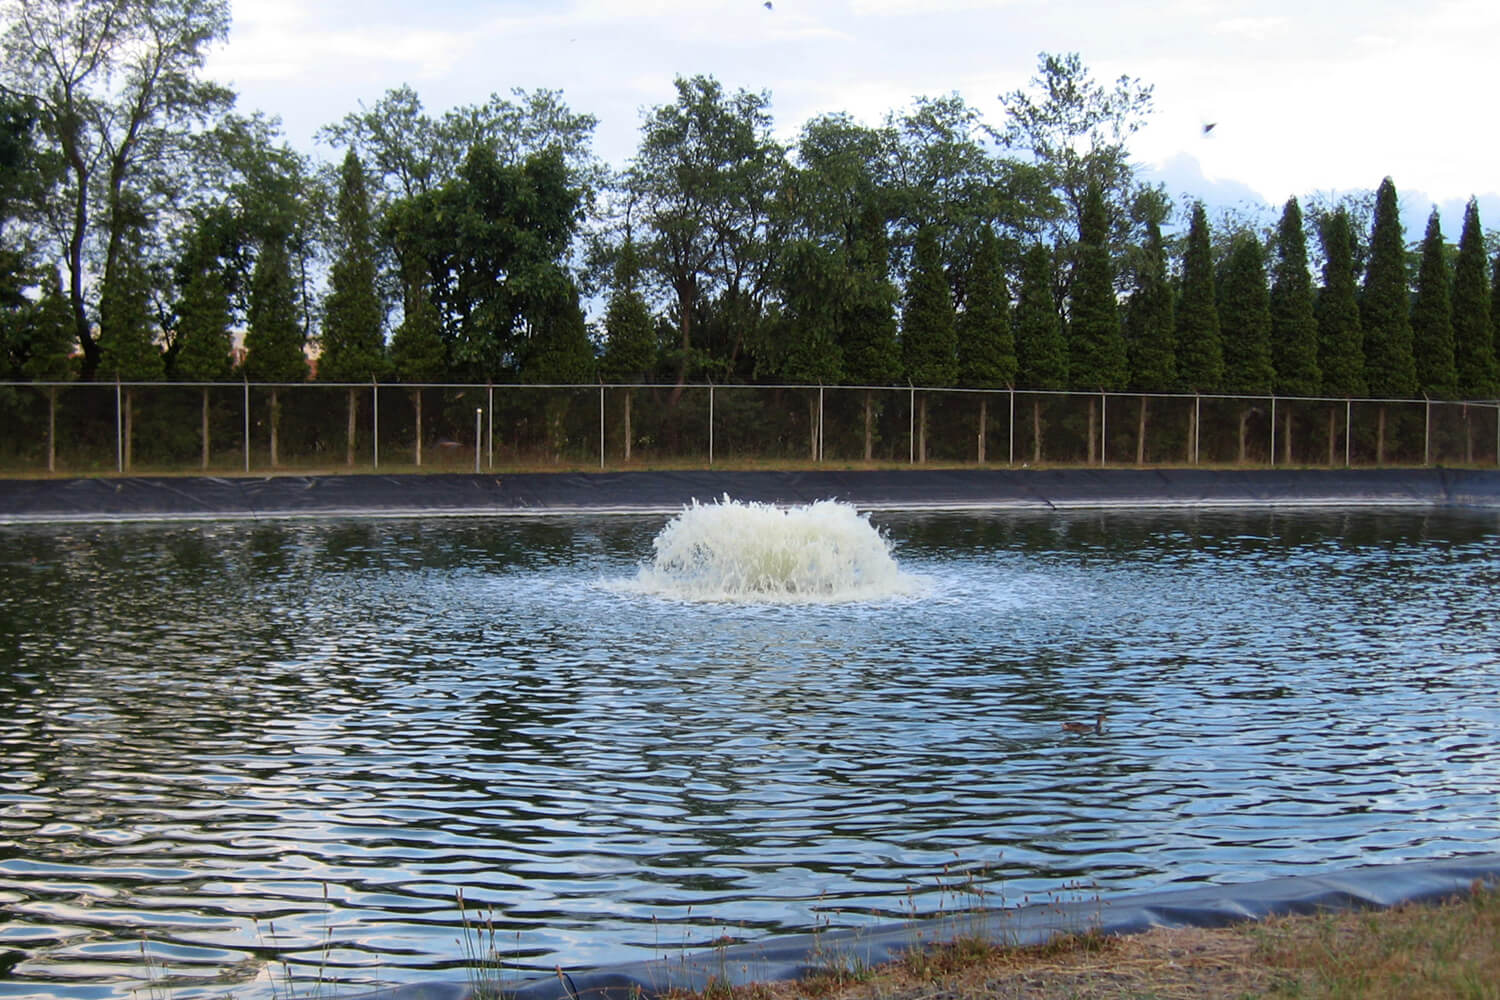 One of Otterbine's Industrial Aerating Fountains